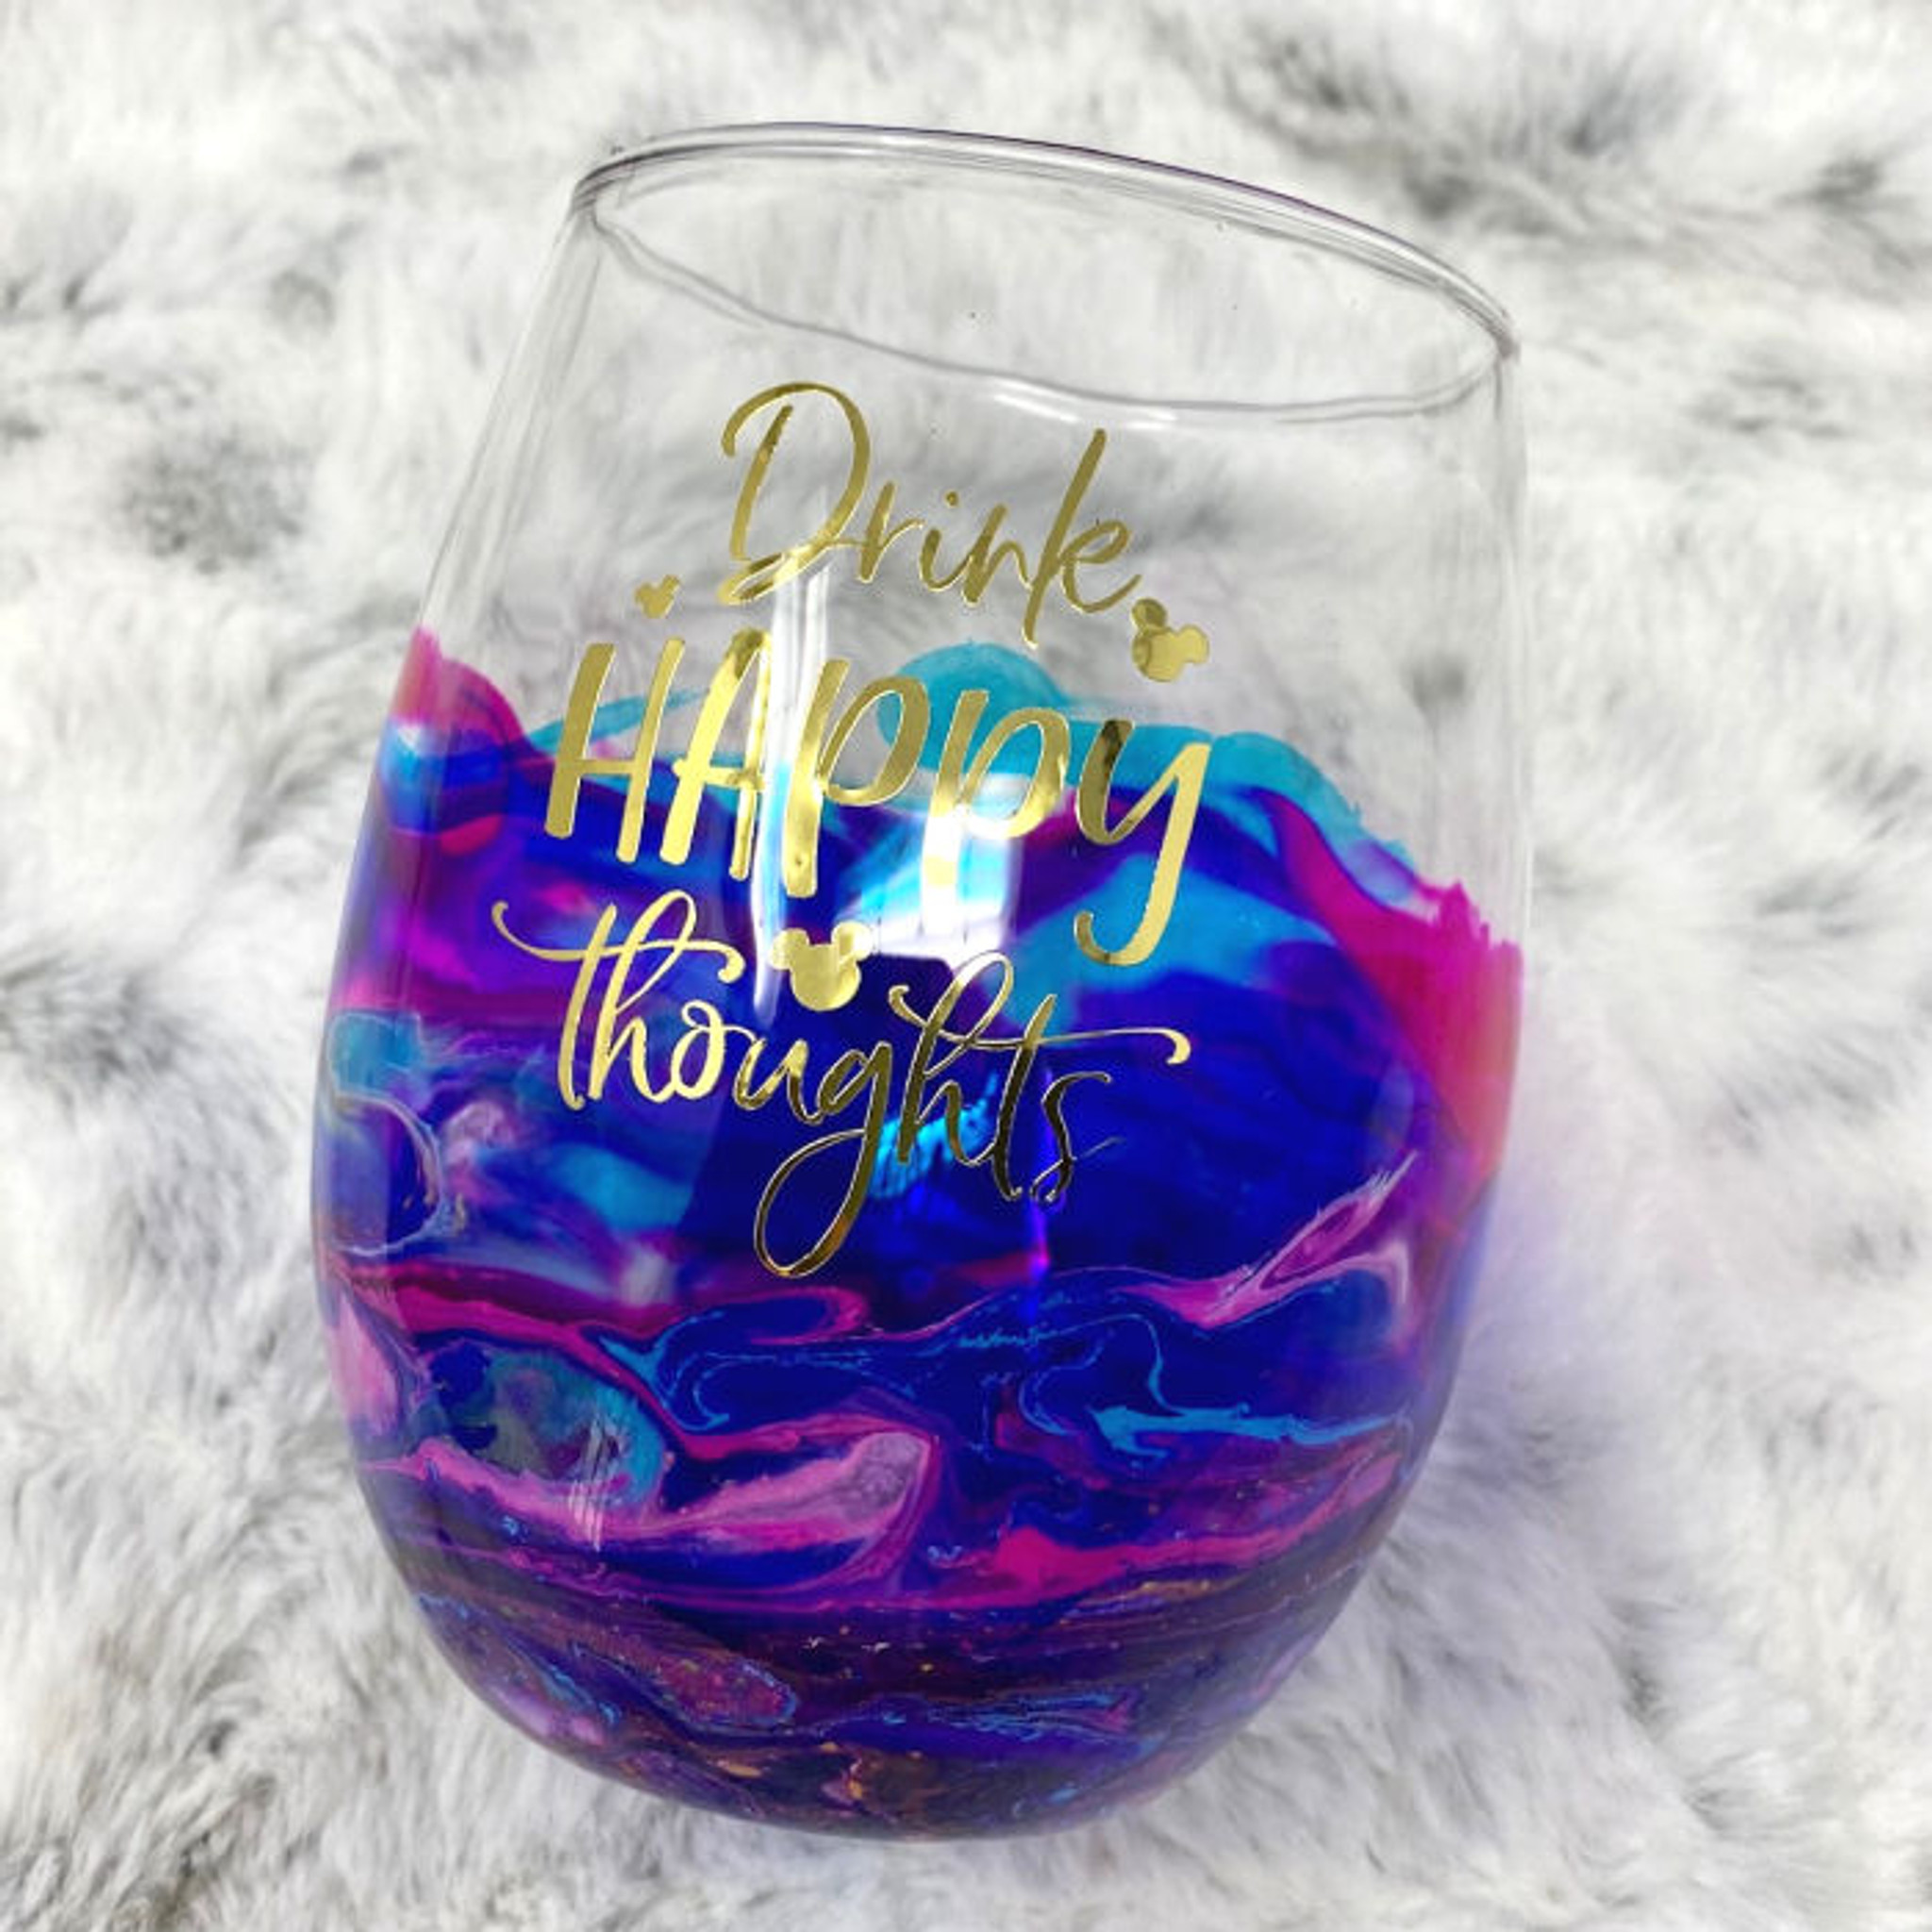 https://cdn11.bigcommerce.com/s-hwqiawfs5j/images/stencil/2048x2048/products/160/504/Item_665_-_20oz_Glass_Stemless_Wine_-_Drink_Happy_Thoughts_2_-_700__30073.1688084856.jpg?c=1